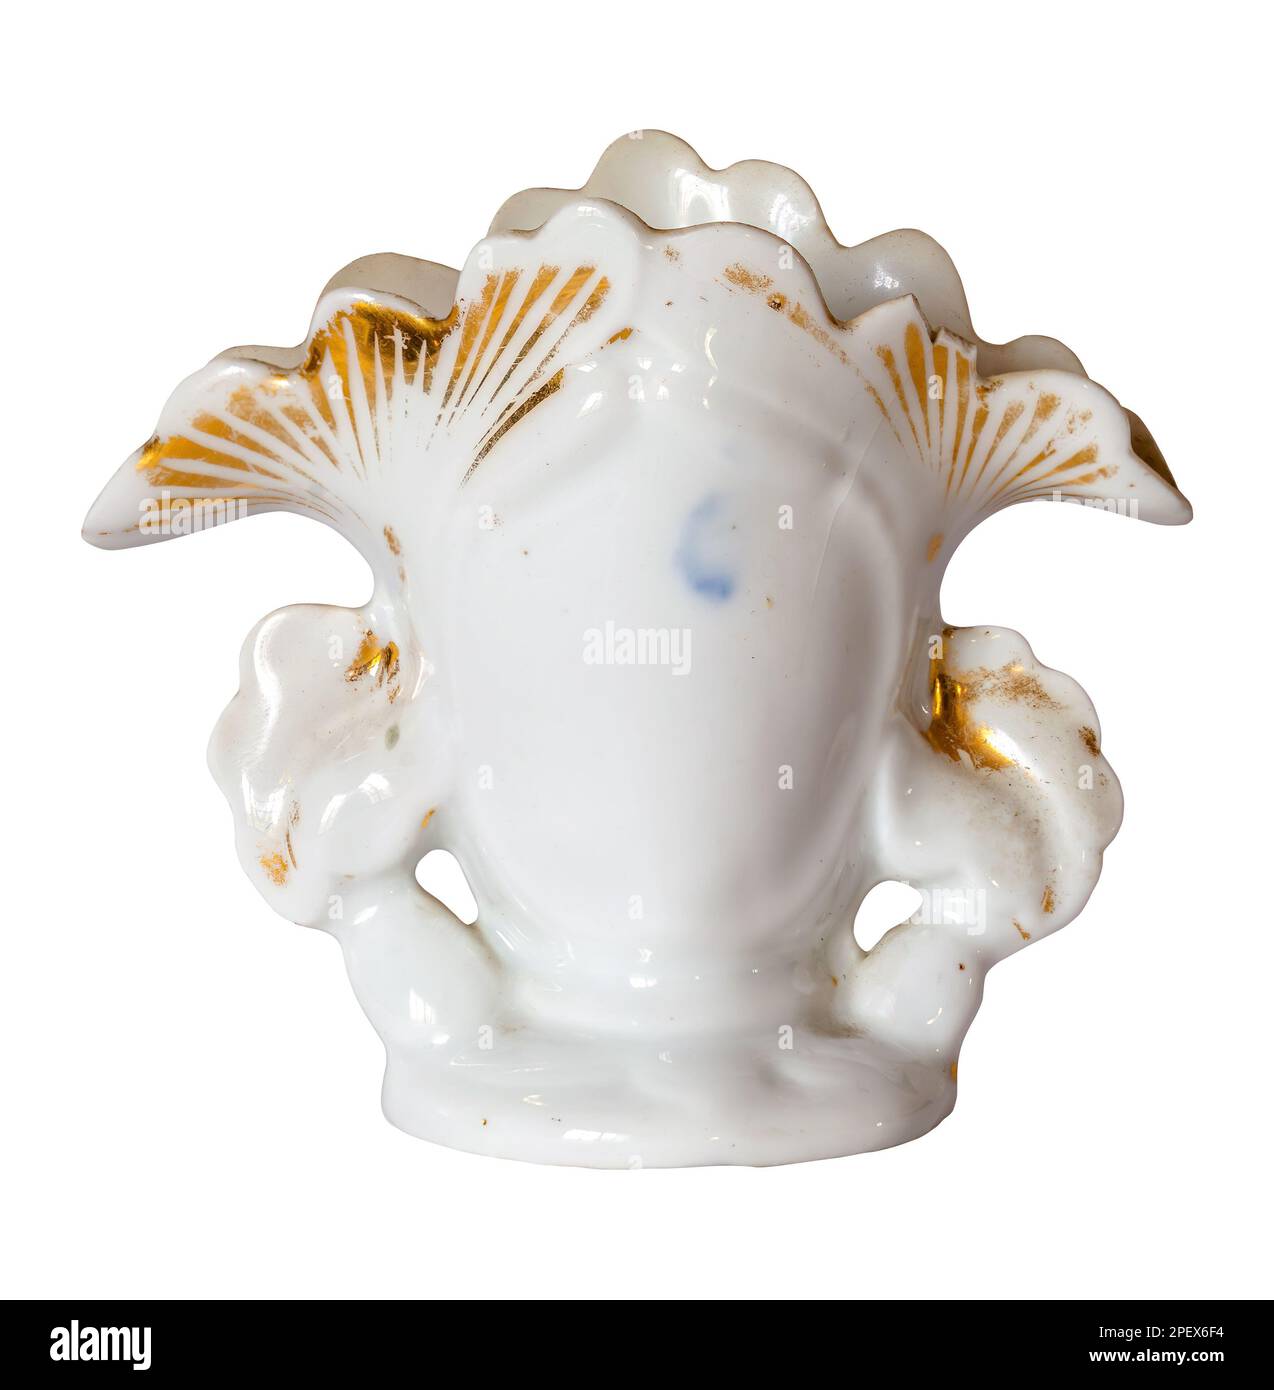 Vintage French Wedding vase, in white and gold porcelain from the 19th Century. Stock Photo